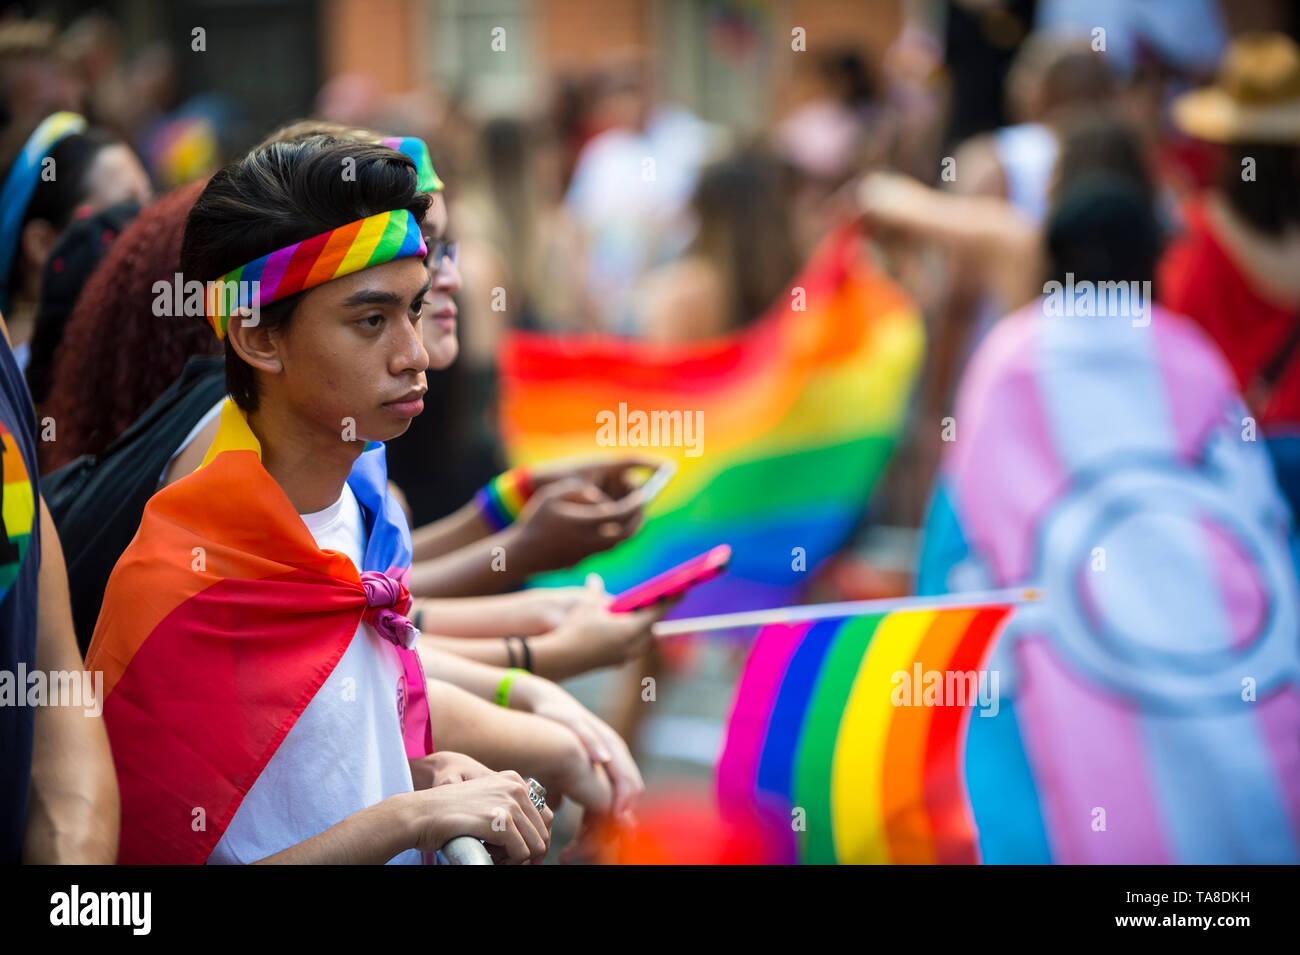 NEW YORK CITY - JUNE 25, 2017: Supporters in gay pride colors wave rainbows flags from the sidelines of the annual Pride Parade. Stock Photo